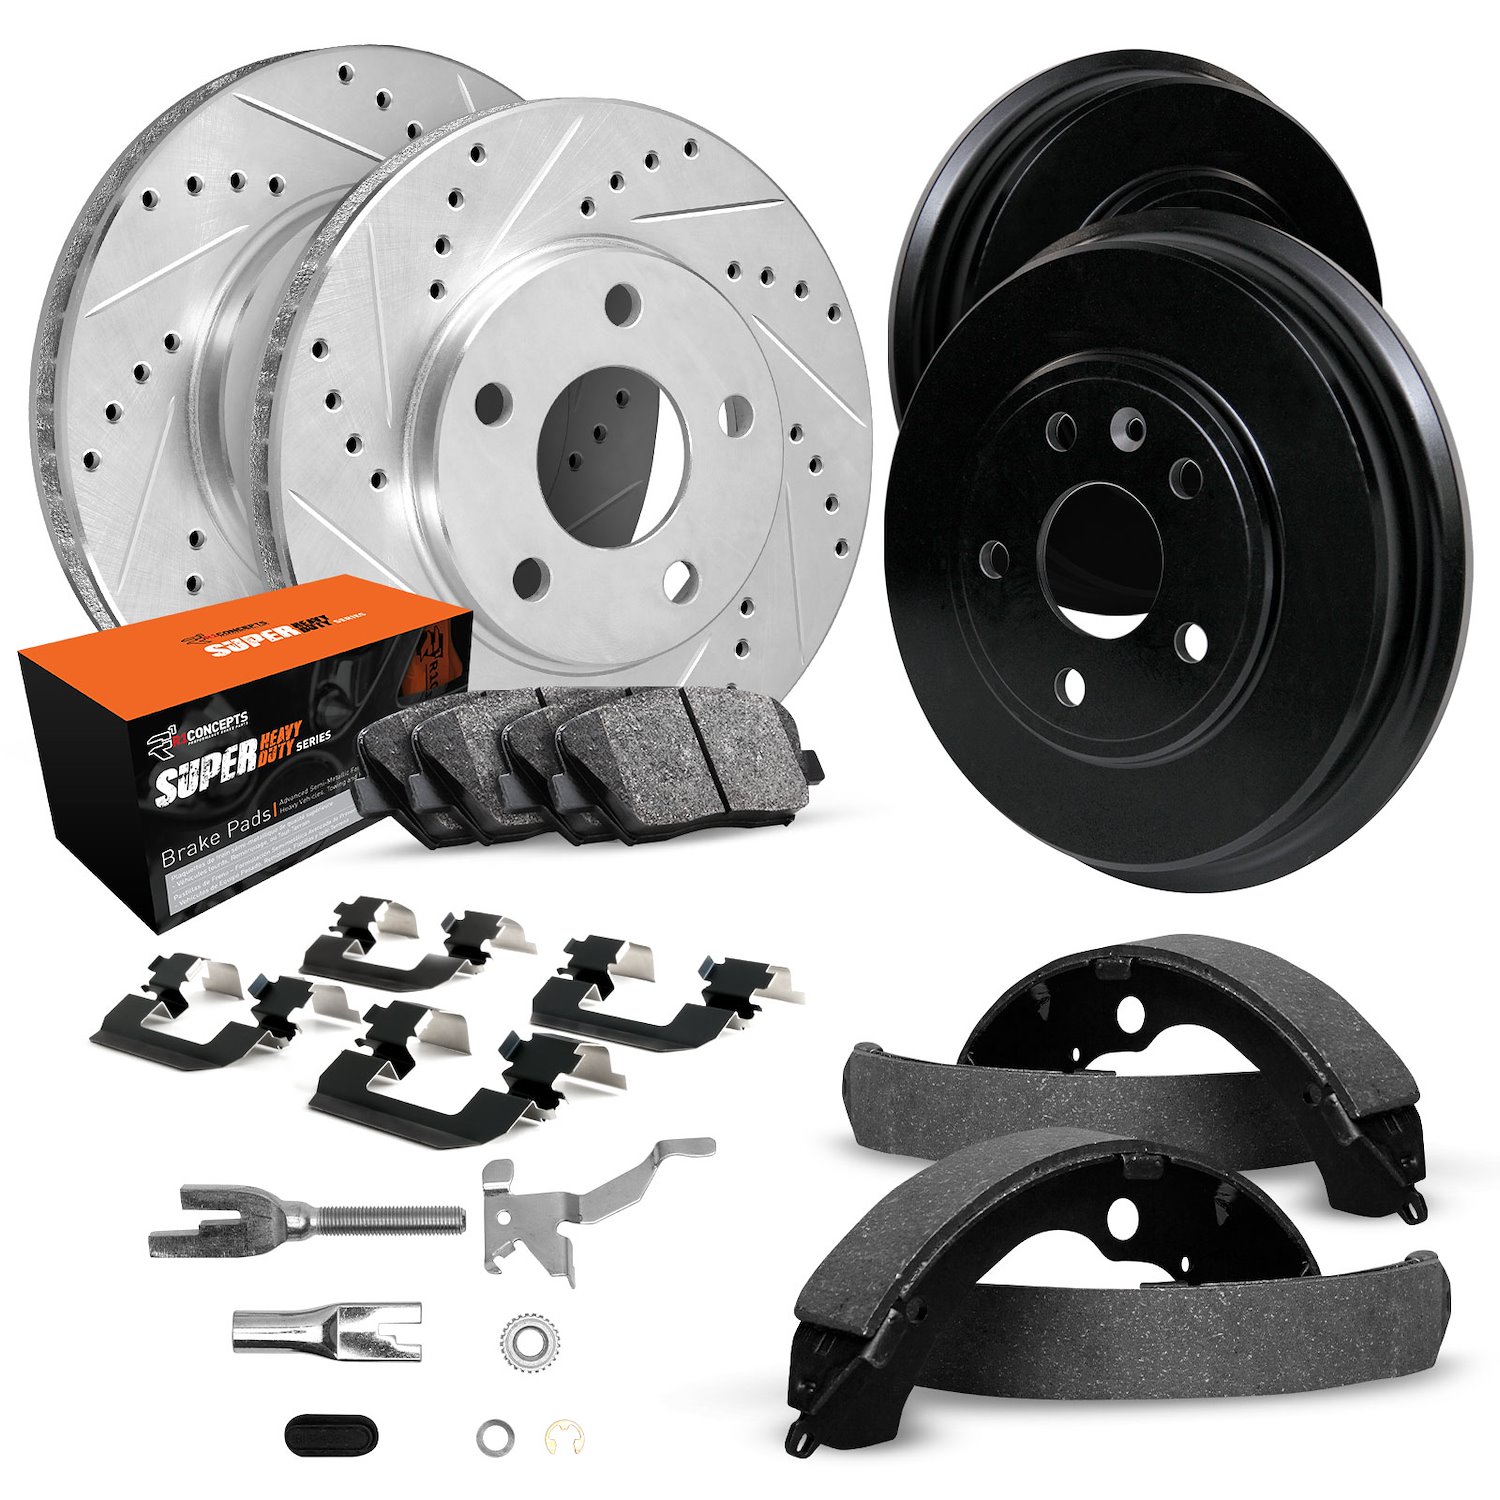 E-Line Drilled/Slotted Silver Rotor & Drum Set w/Super-Duty Pads, Shoes/Hardware/Adjusters, 2003-2009 Ford/Lincoln/Mercury/Mazda